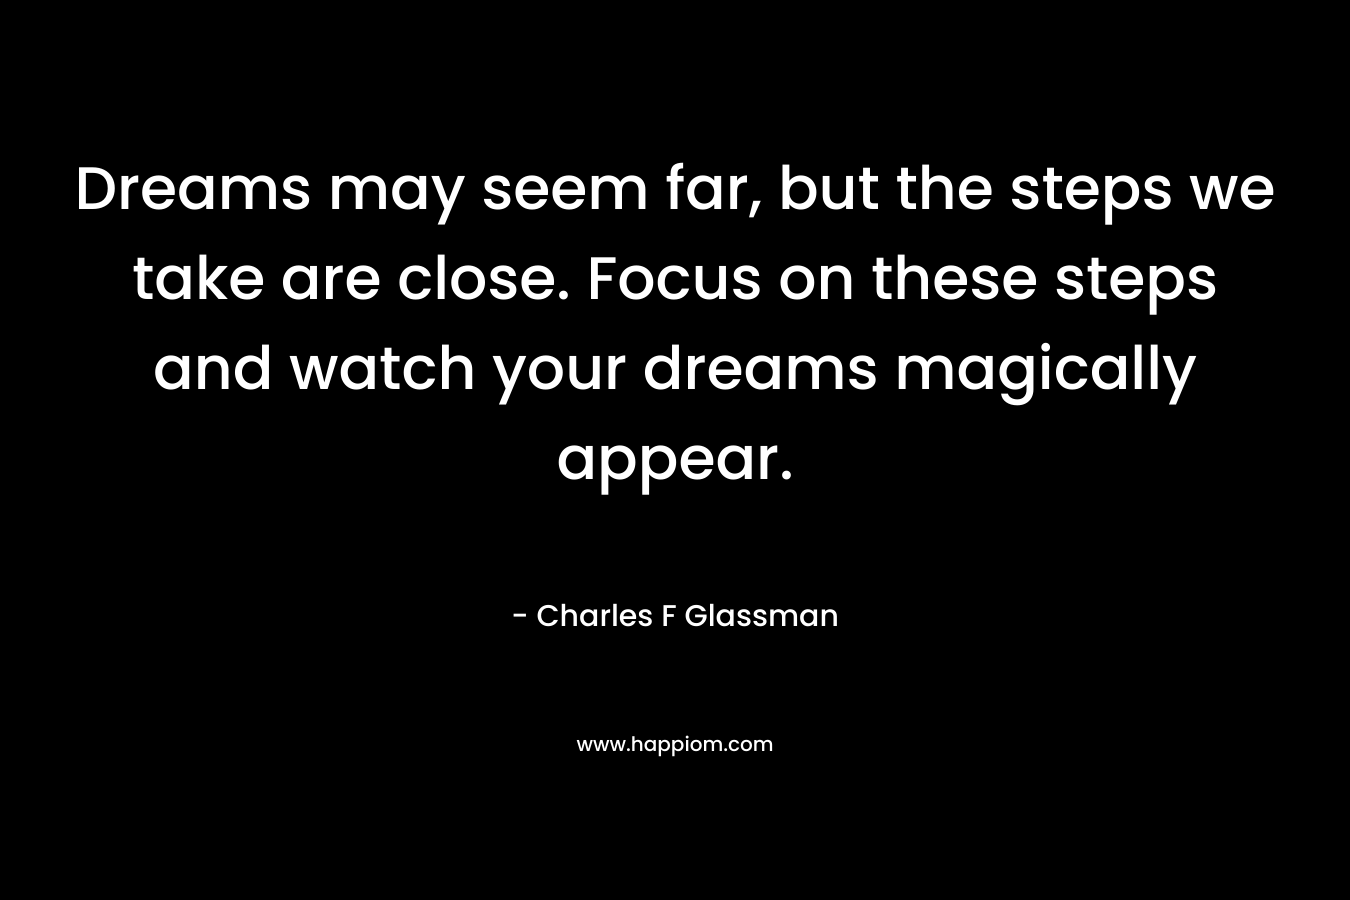 Dreams may seem far, but the steps we take are close. Focus on these steps and watch your dreams magically appear.